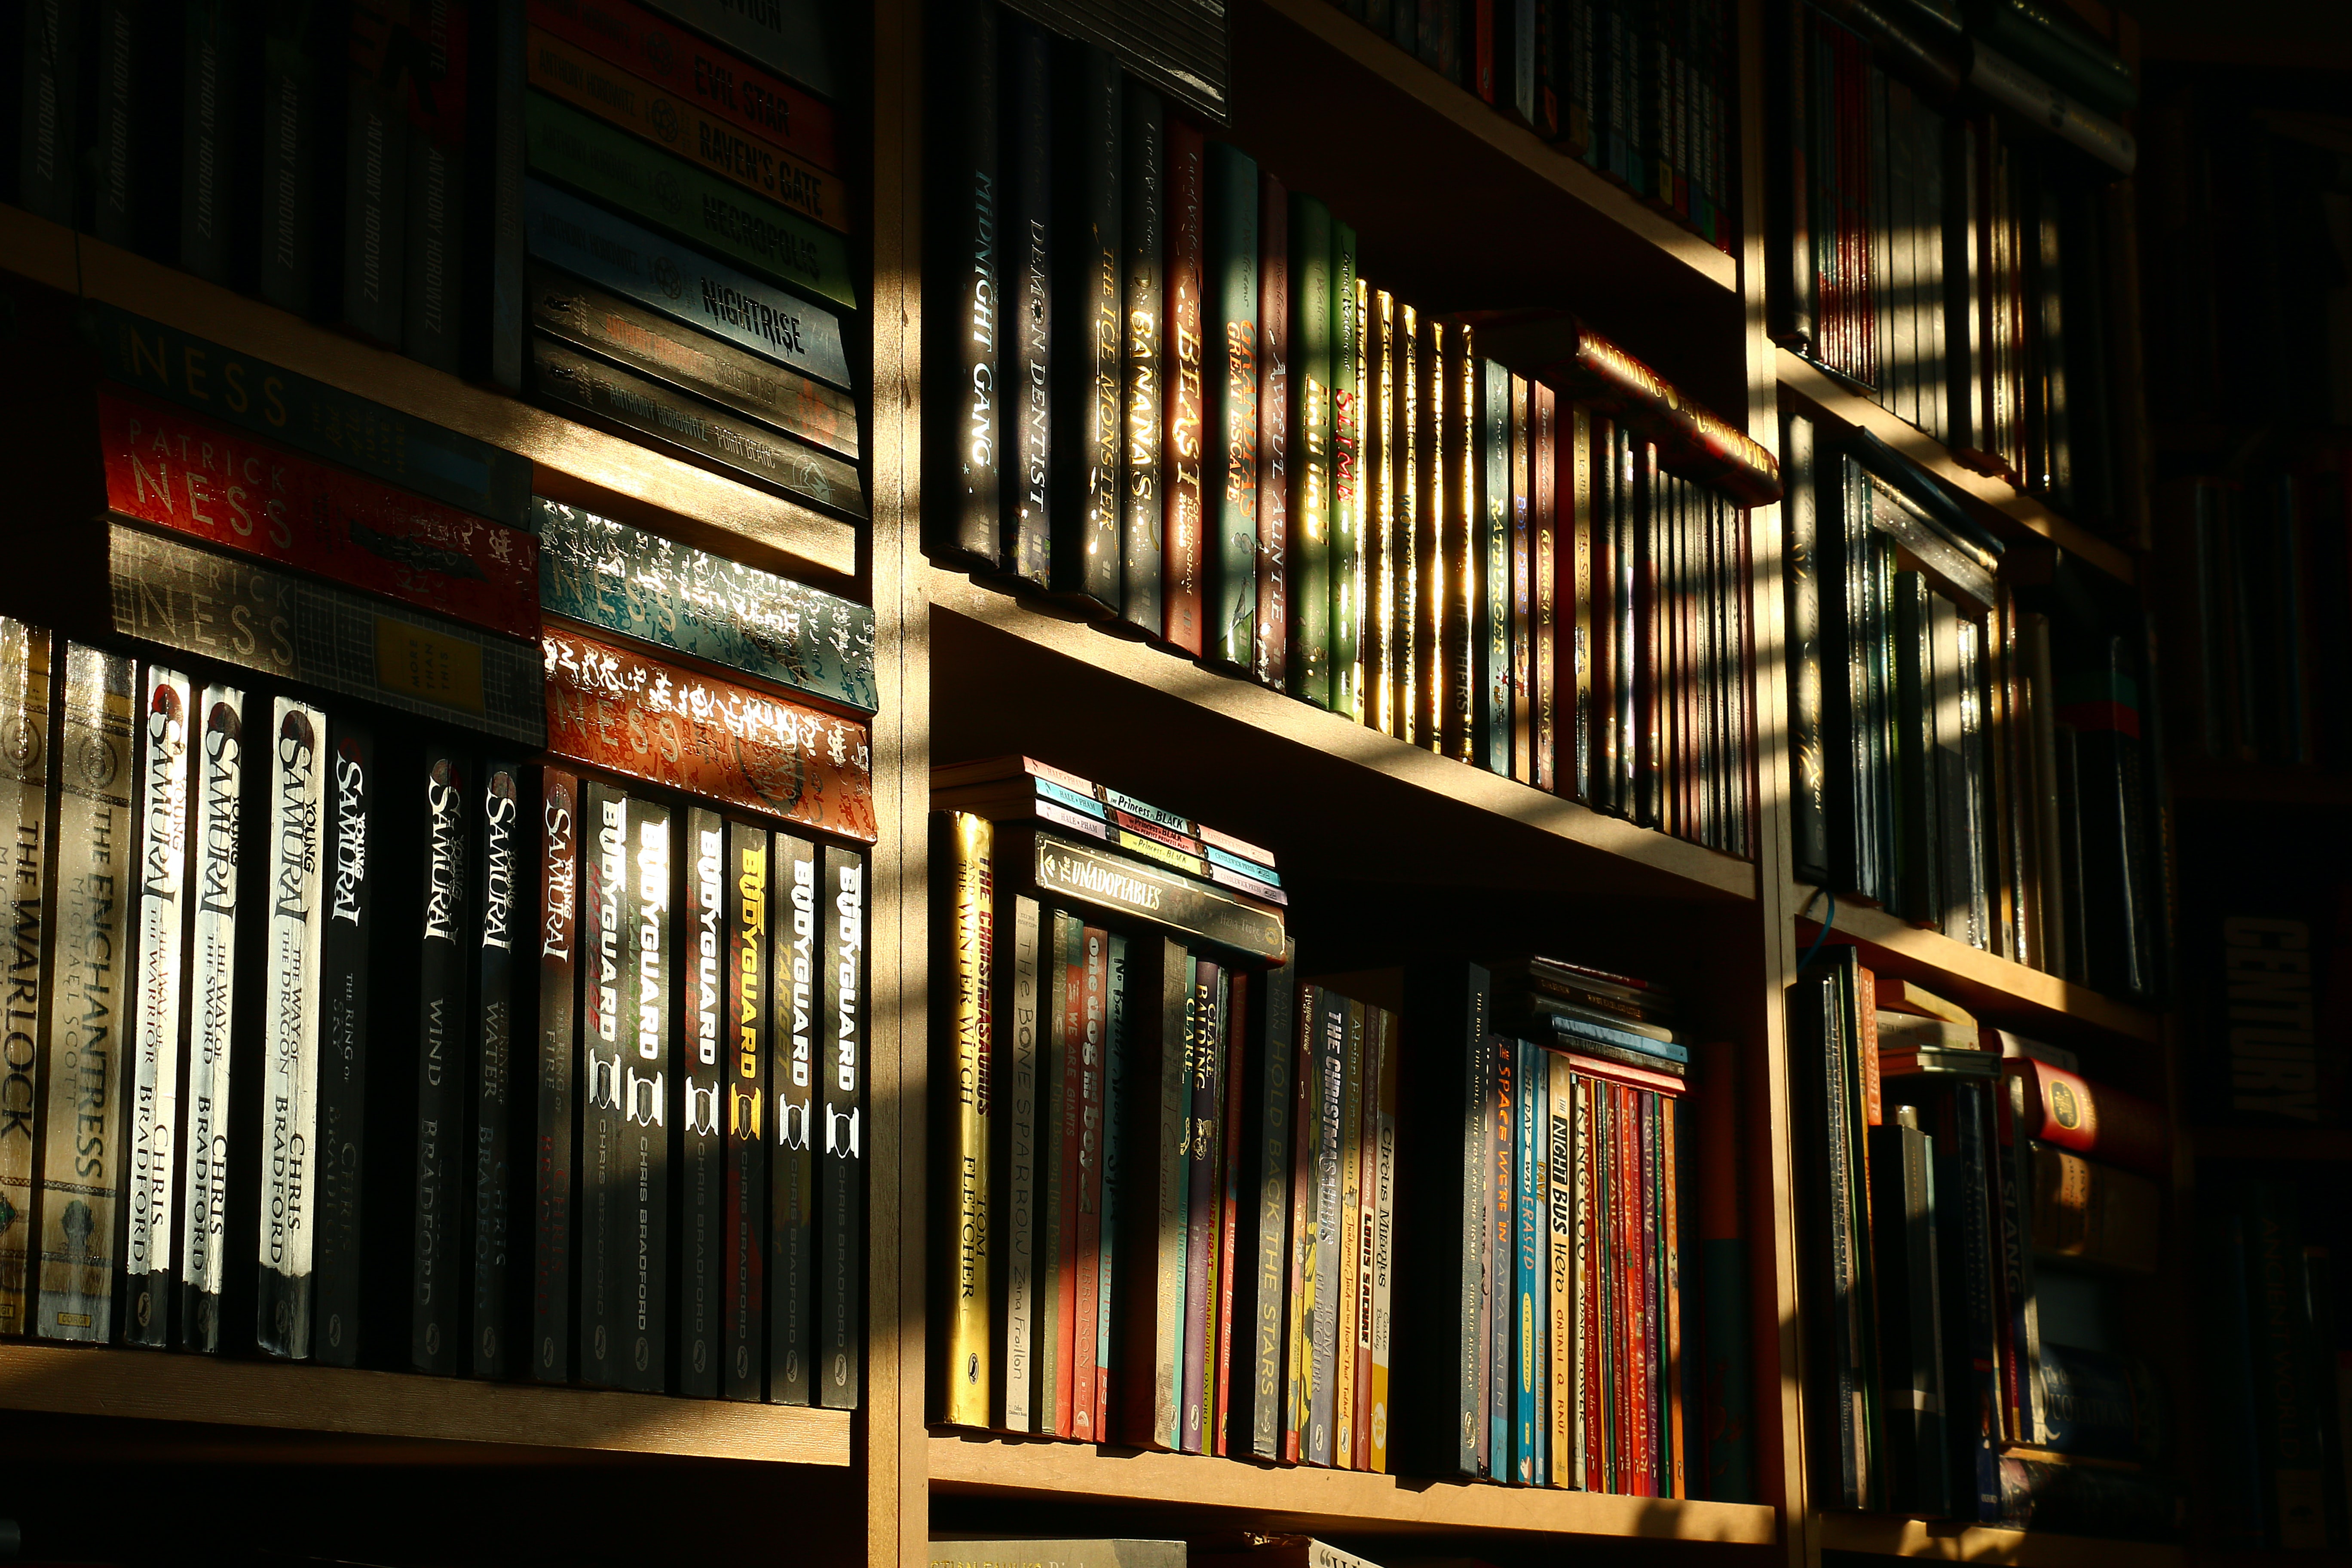 Close-up photo of a bookshelf filled with books. Early morning or late afternoon sun rays hit the books and give the photo a warm atmosphere.